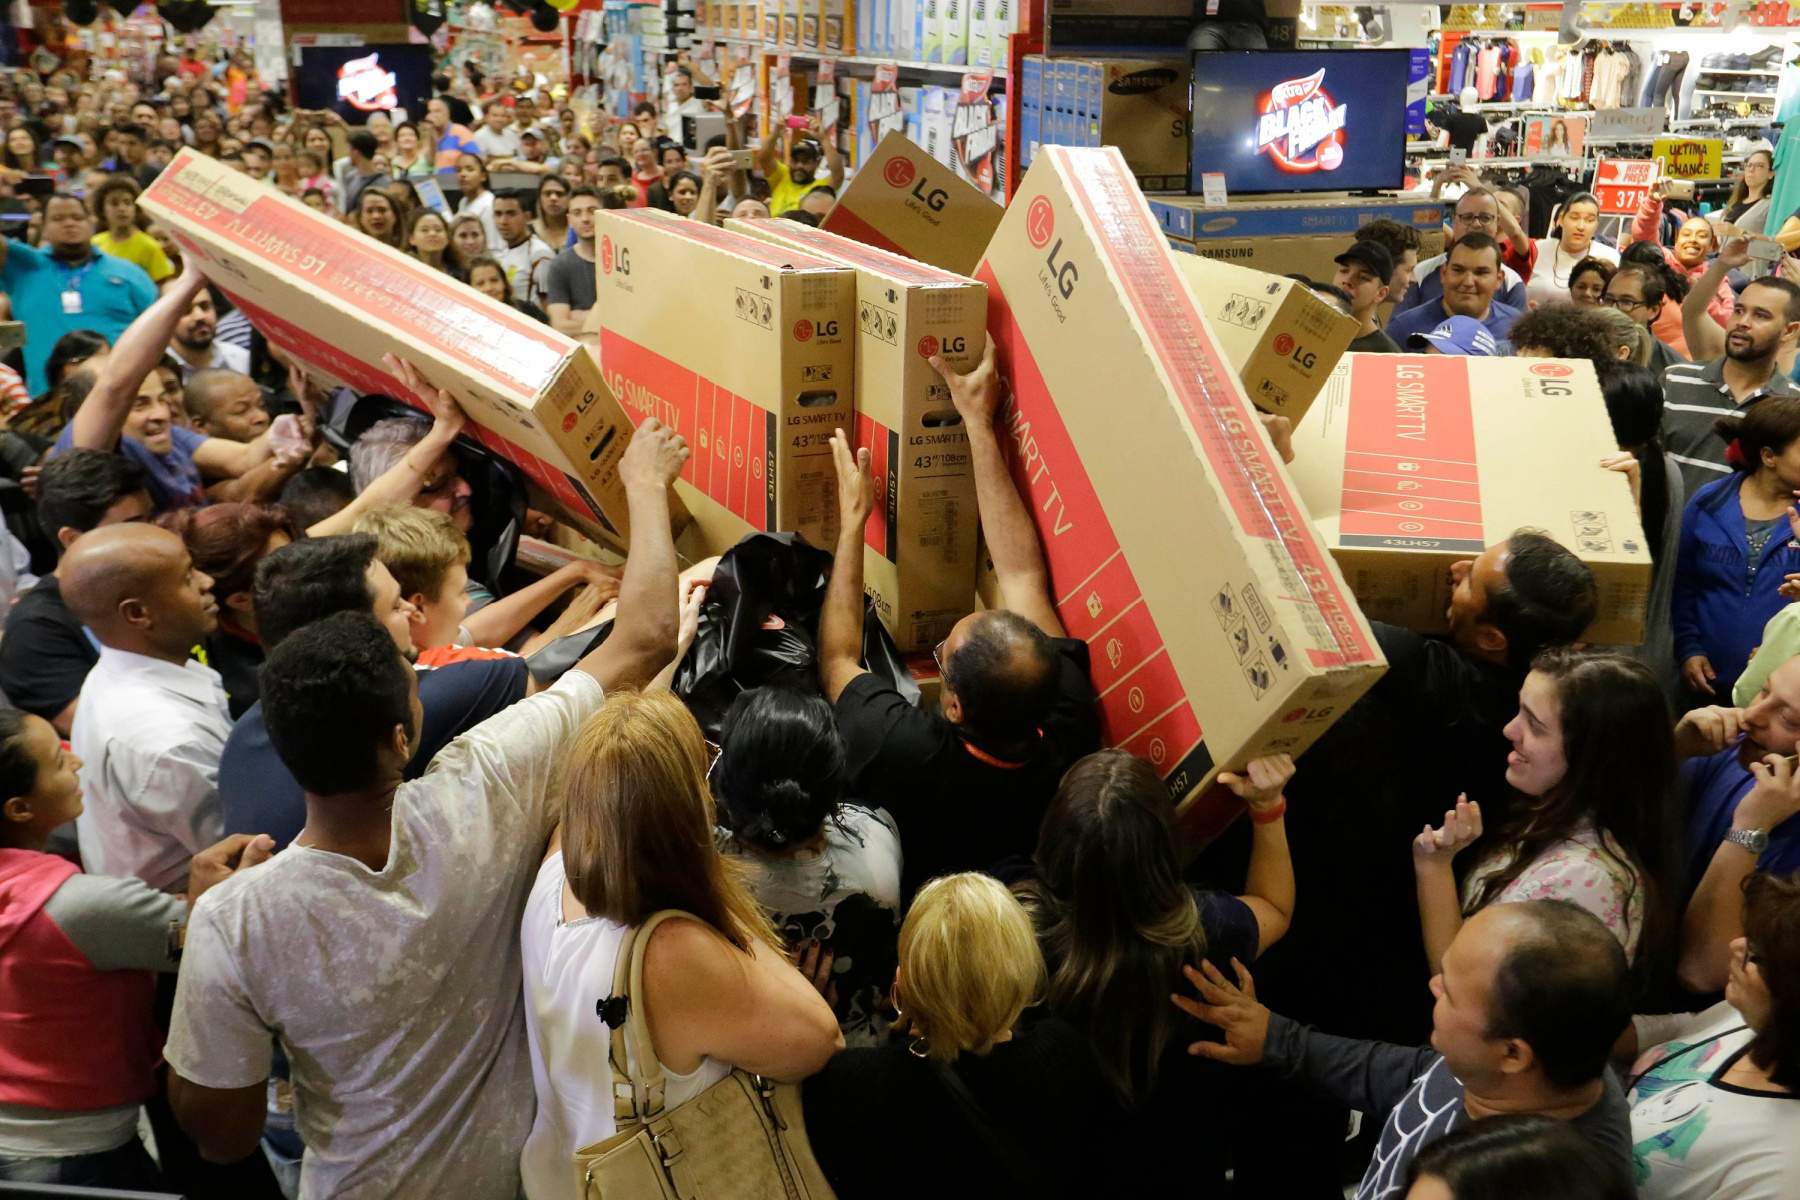 The Black Friday deals might not be as lucrative as you think. Here is why